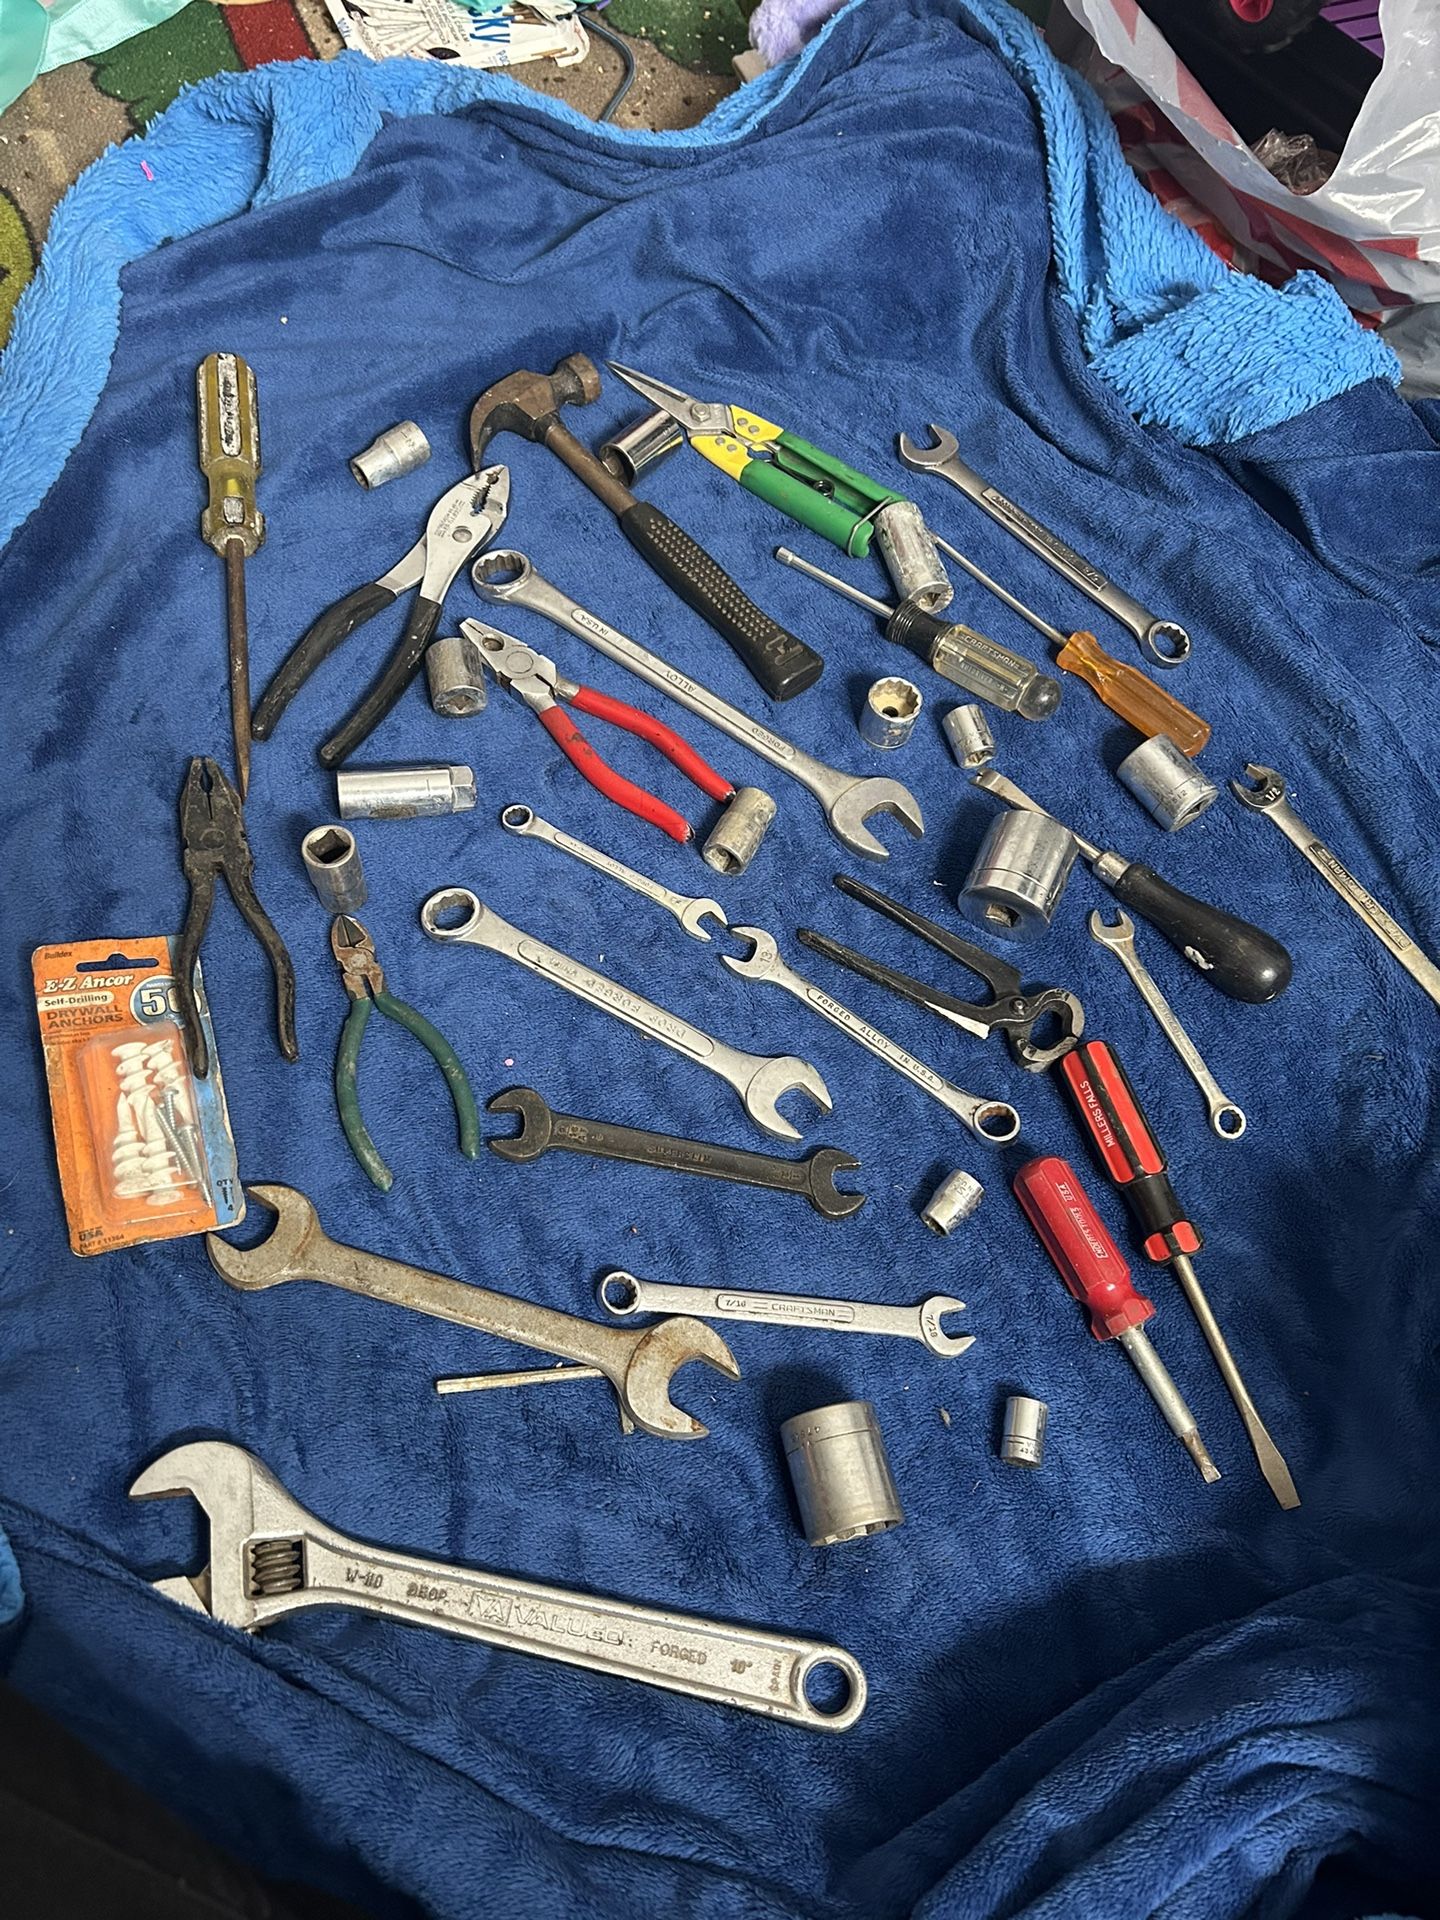 More Than 50 Tools 